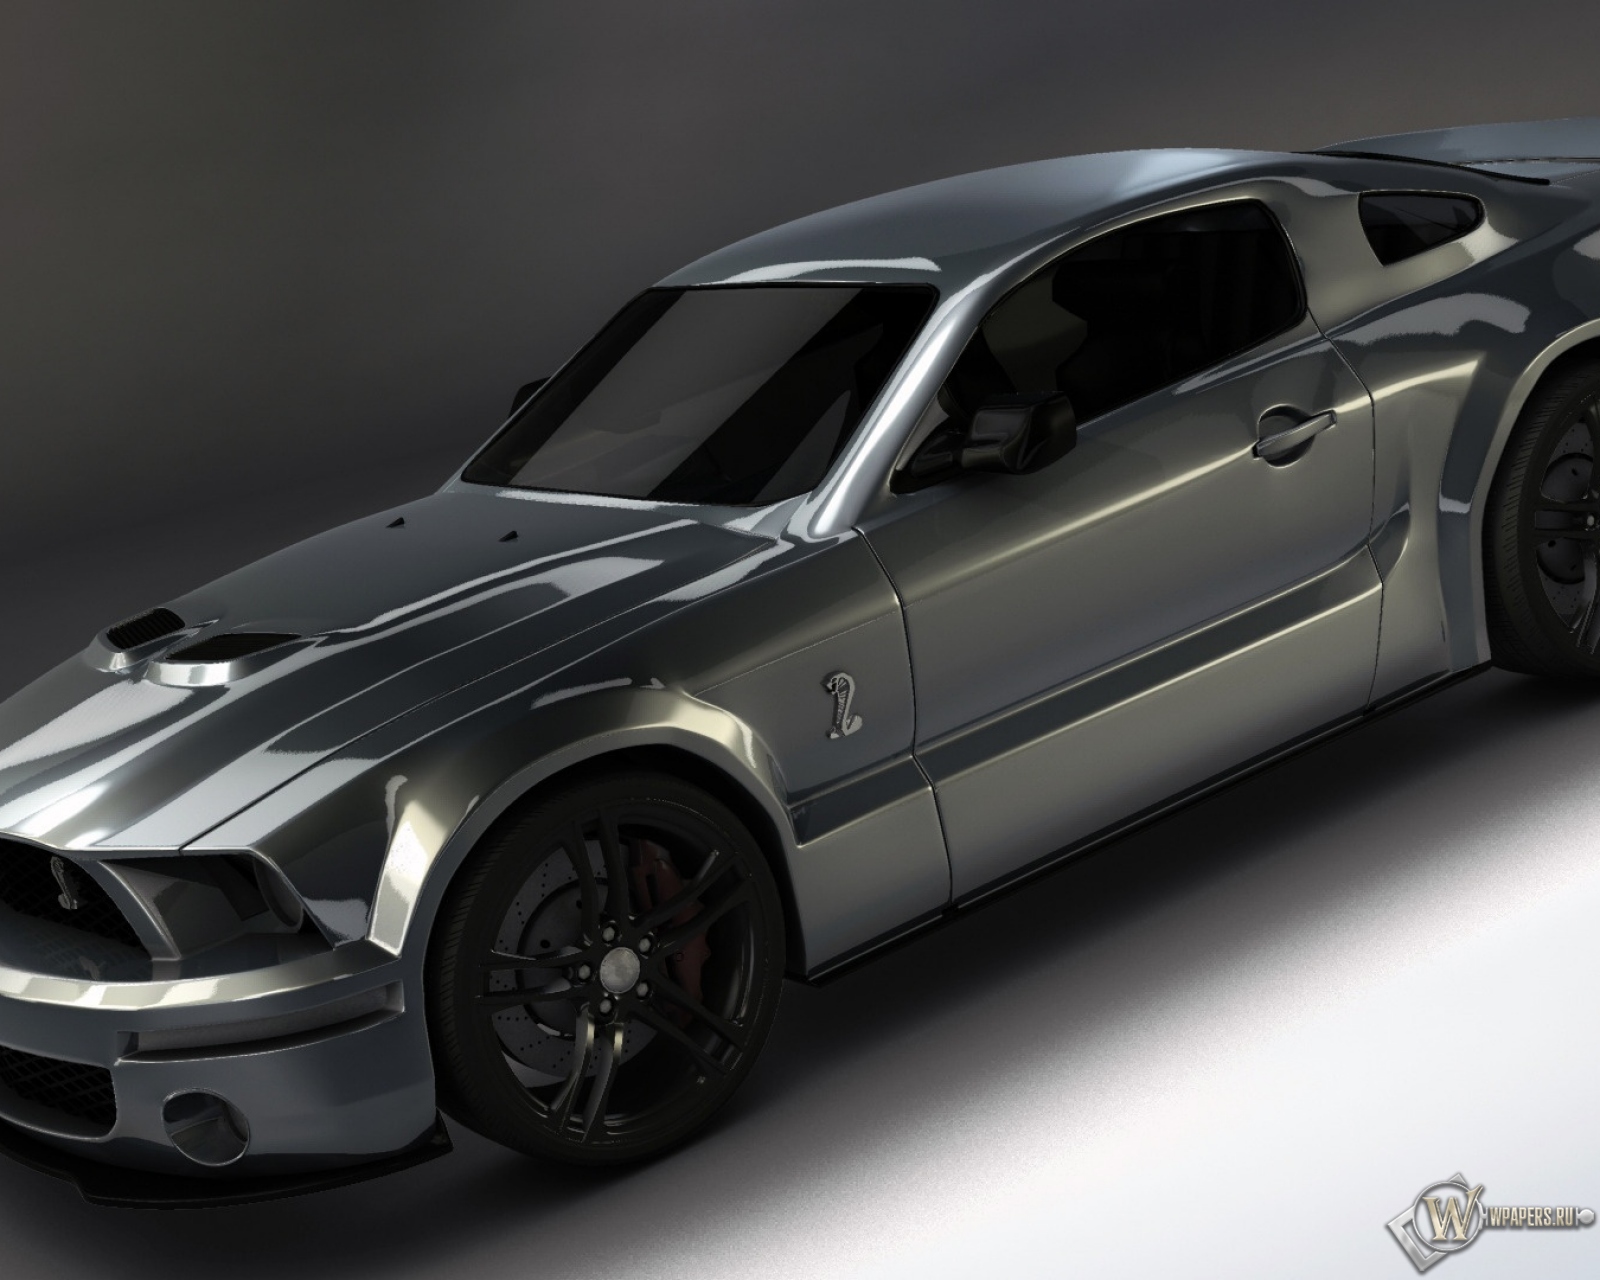 Ford Mustang Shelby GT500 1600x1280